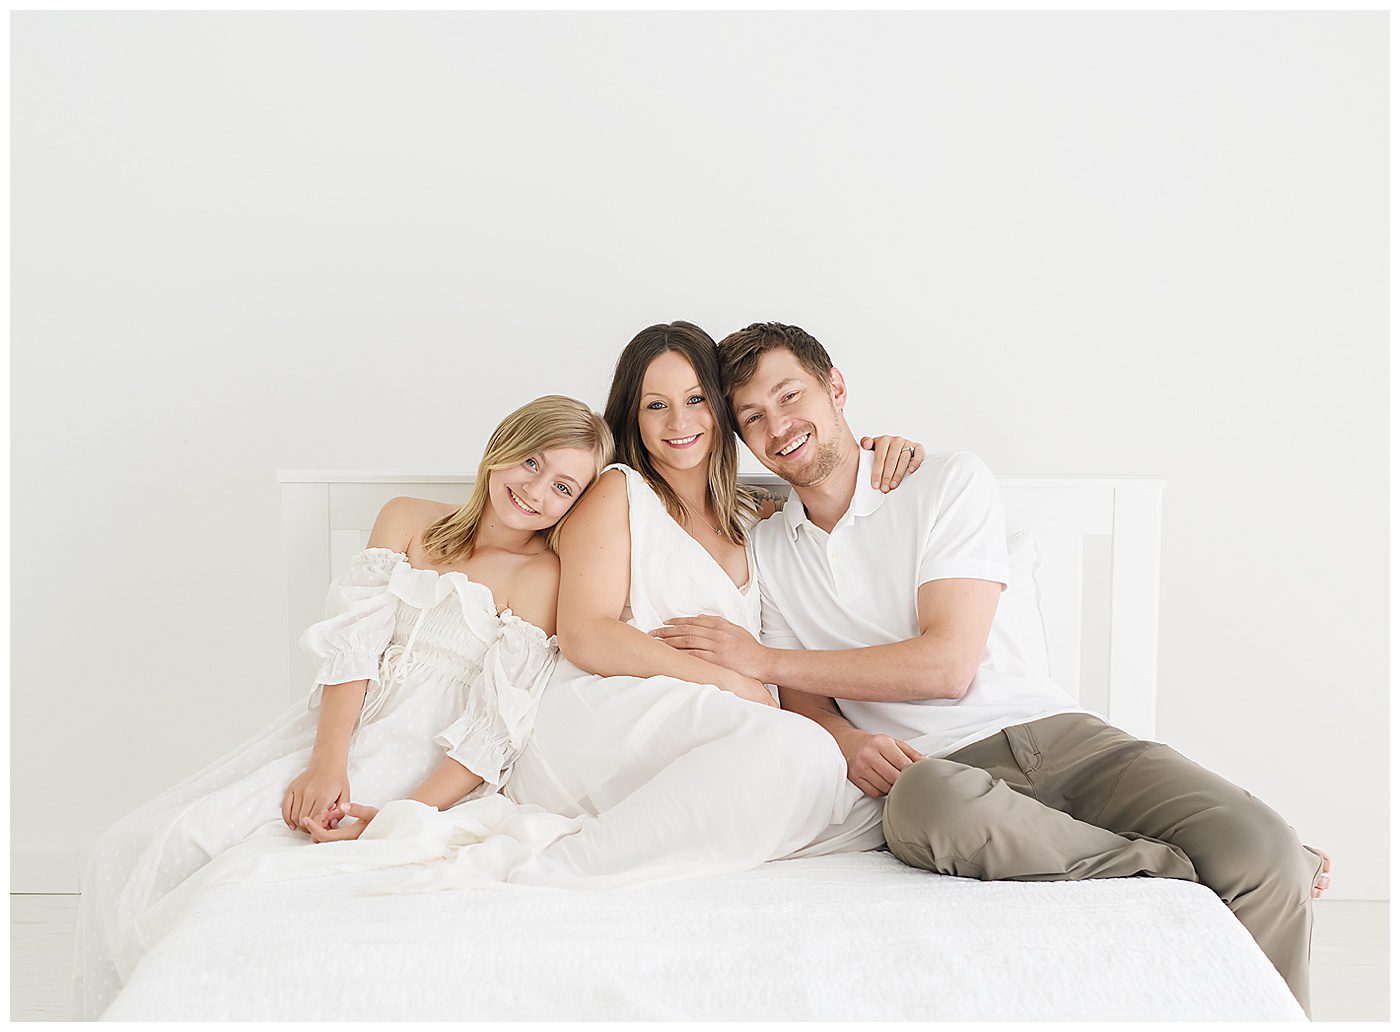 Family photo with mom, dad, pre-teen on bed in all white natural light photography studio